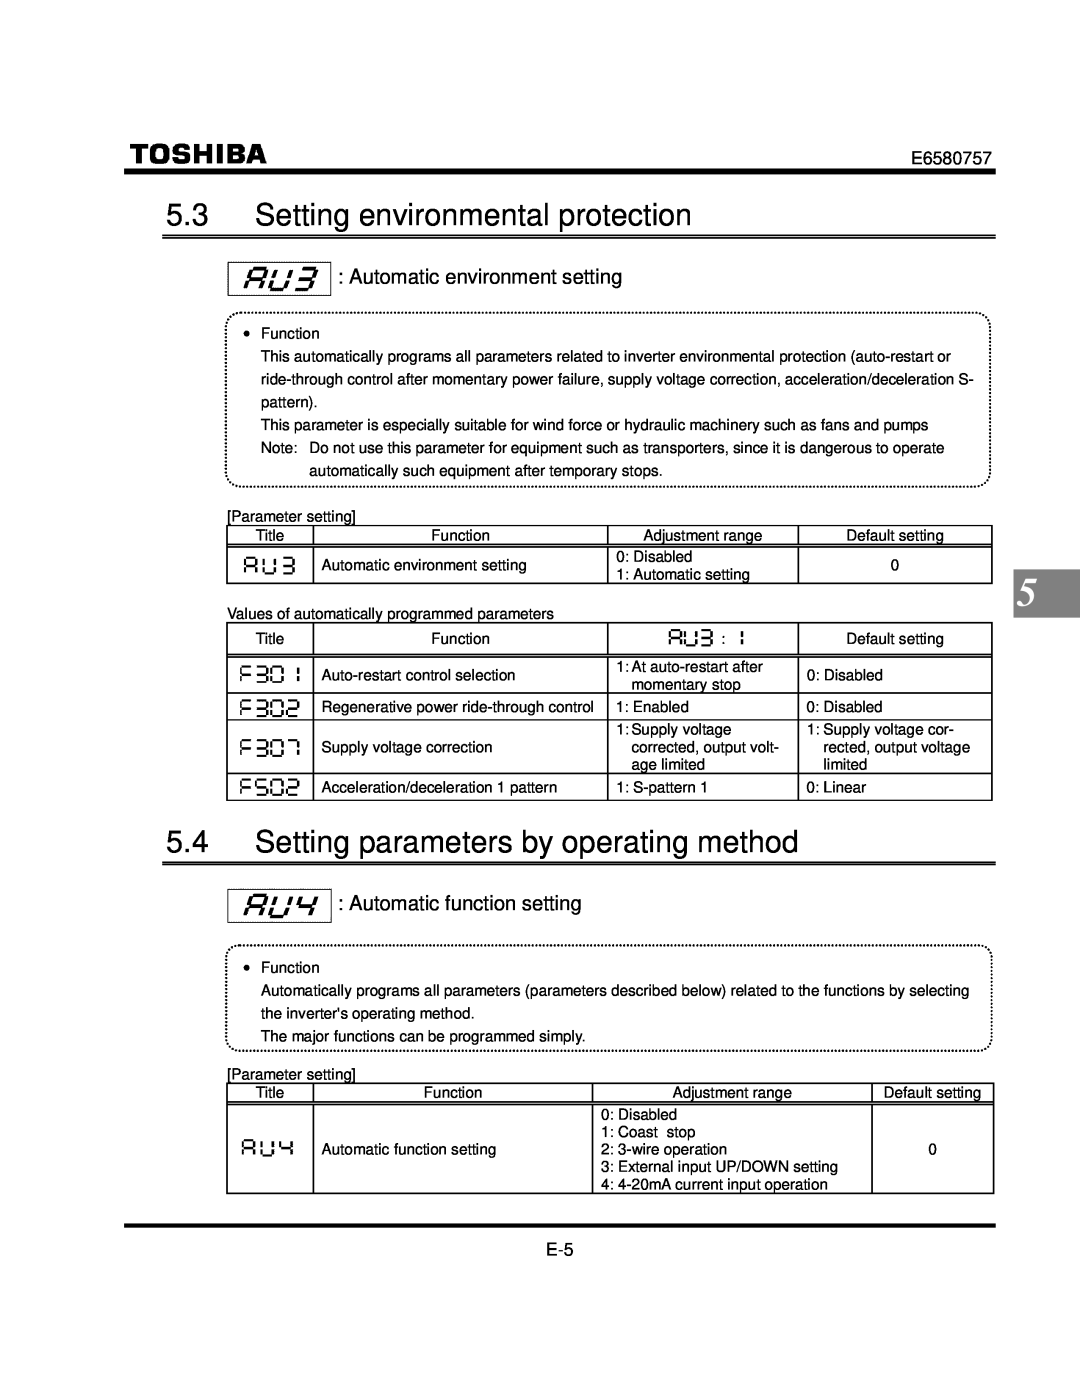 Toshiba VF-S9 Setting environmental protection, Setting parameters by operating method, Automatic environment setting 